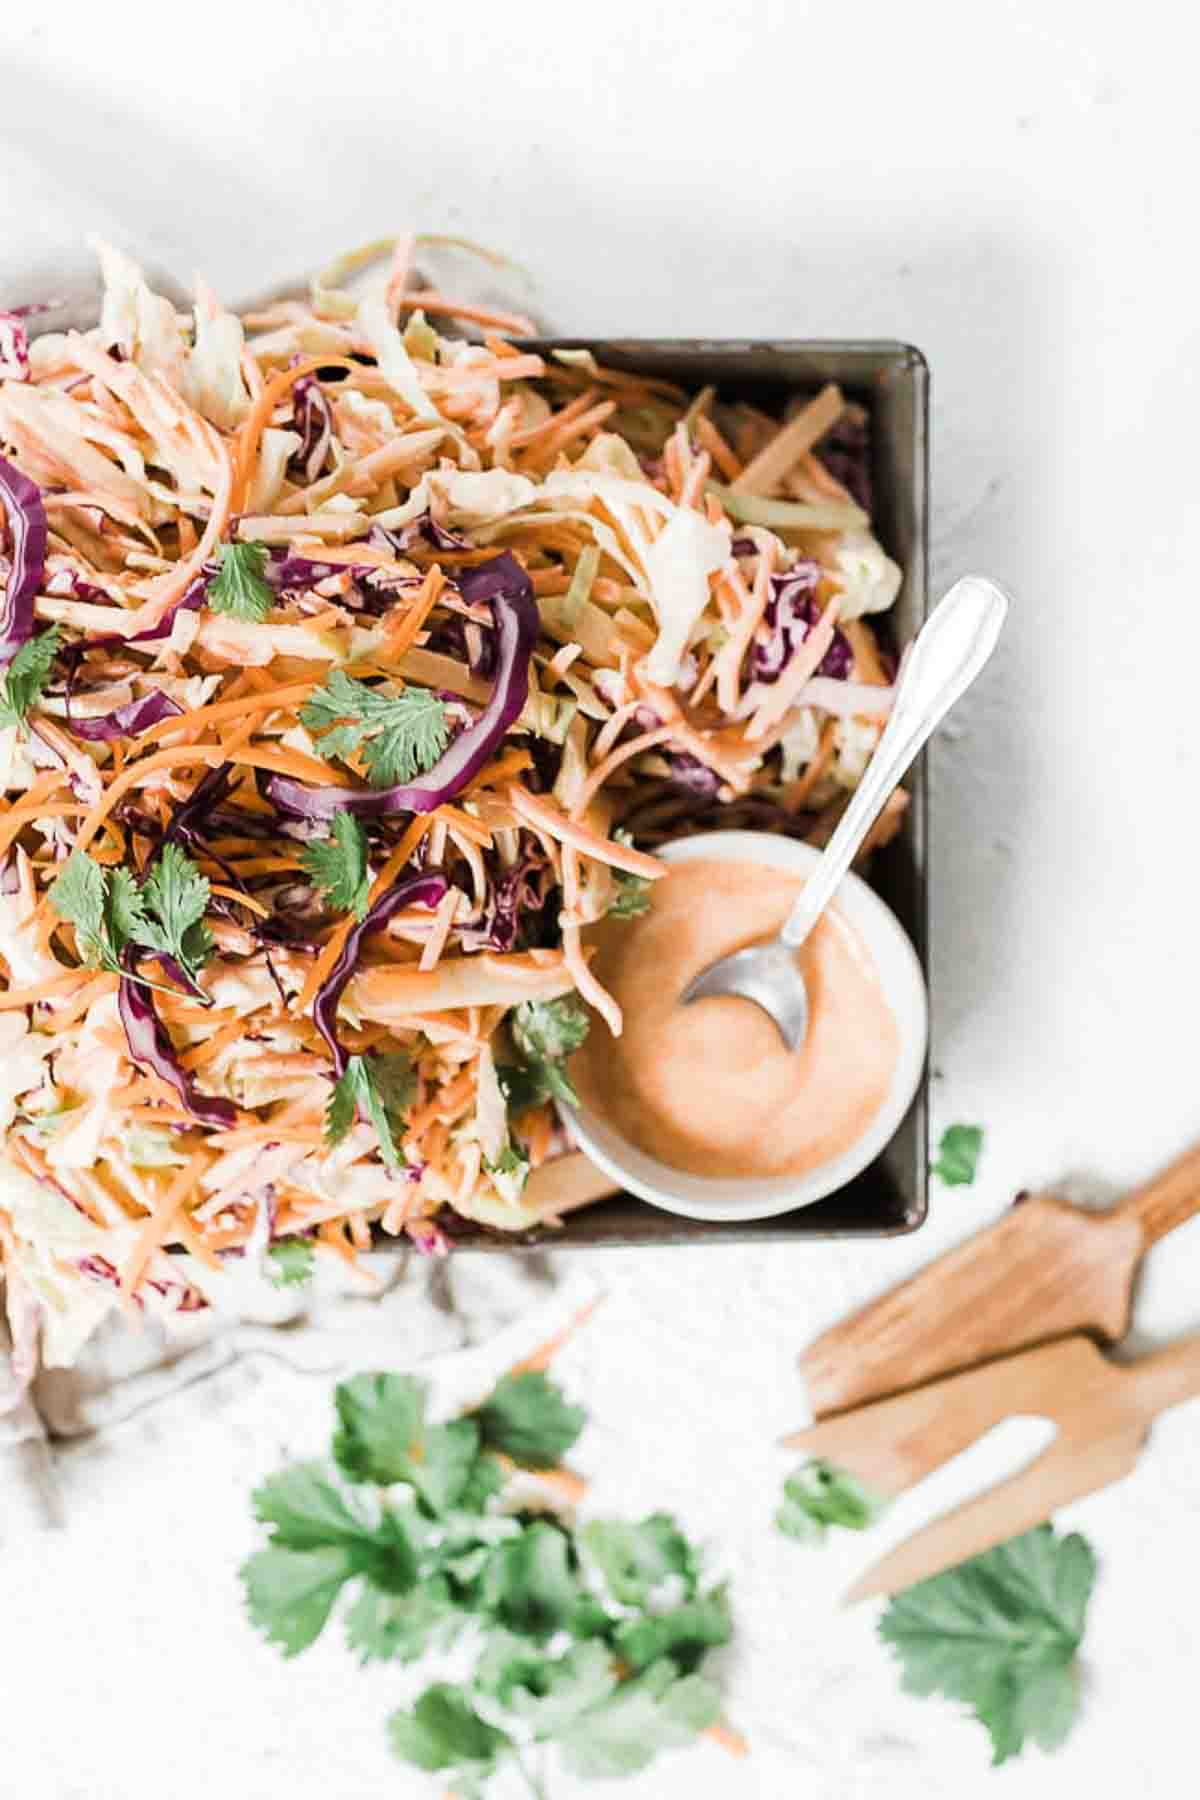 Homemade coleslaw recipe in a metal cake pan, dressing to the side.